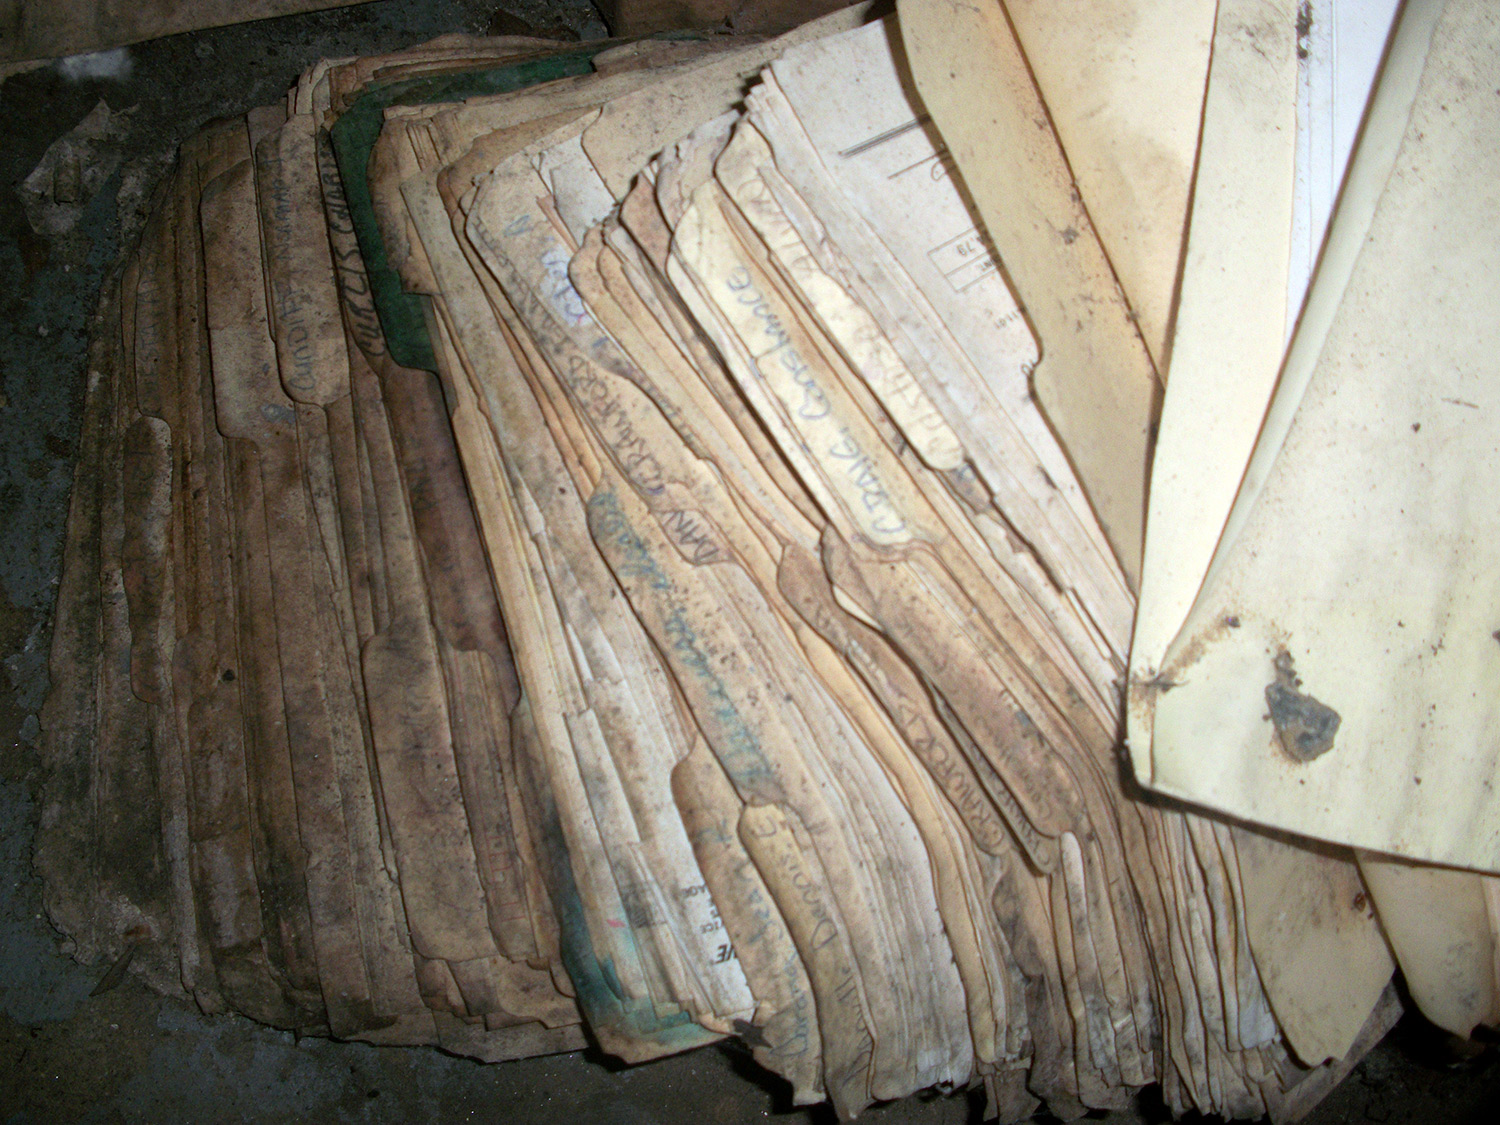 Moisture and mold covered folders with papers and documents laying on the basement floor